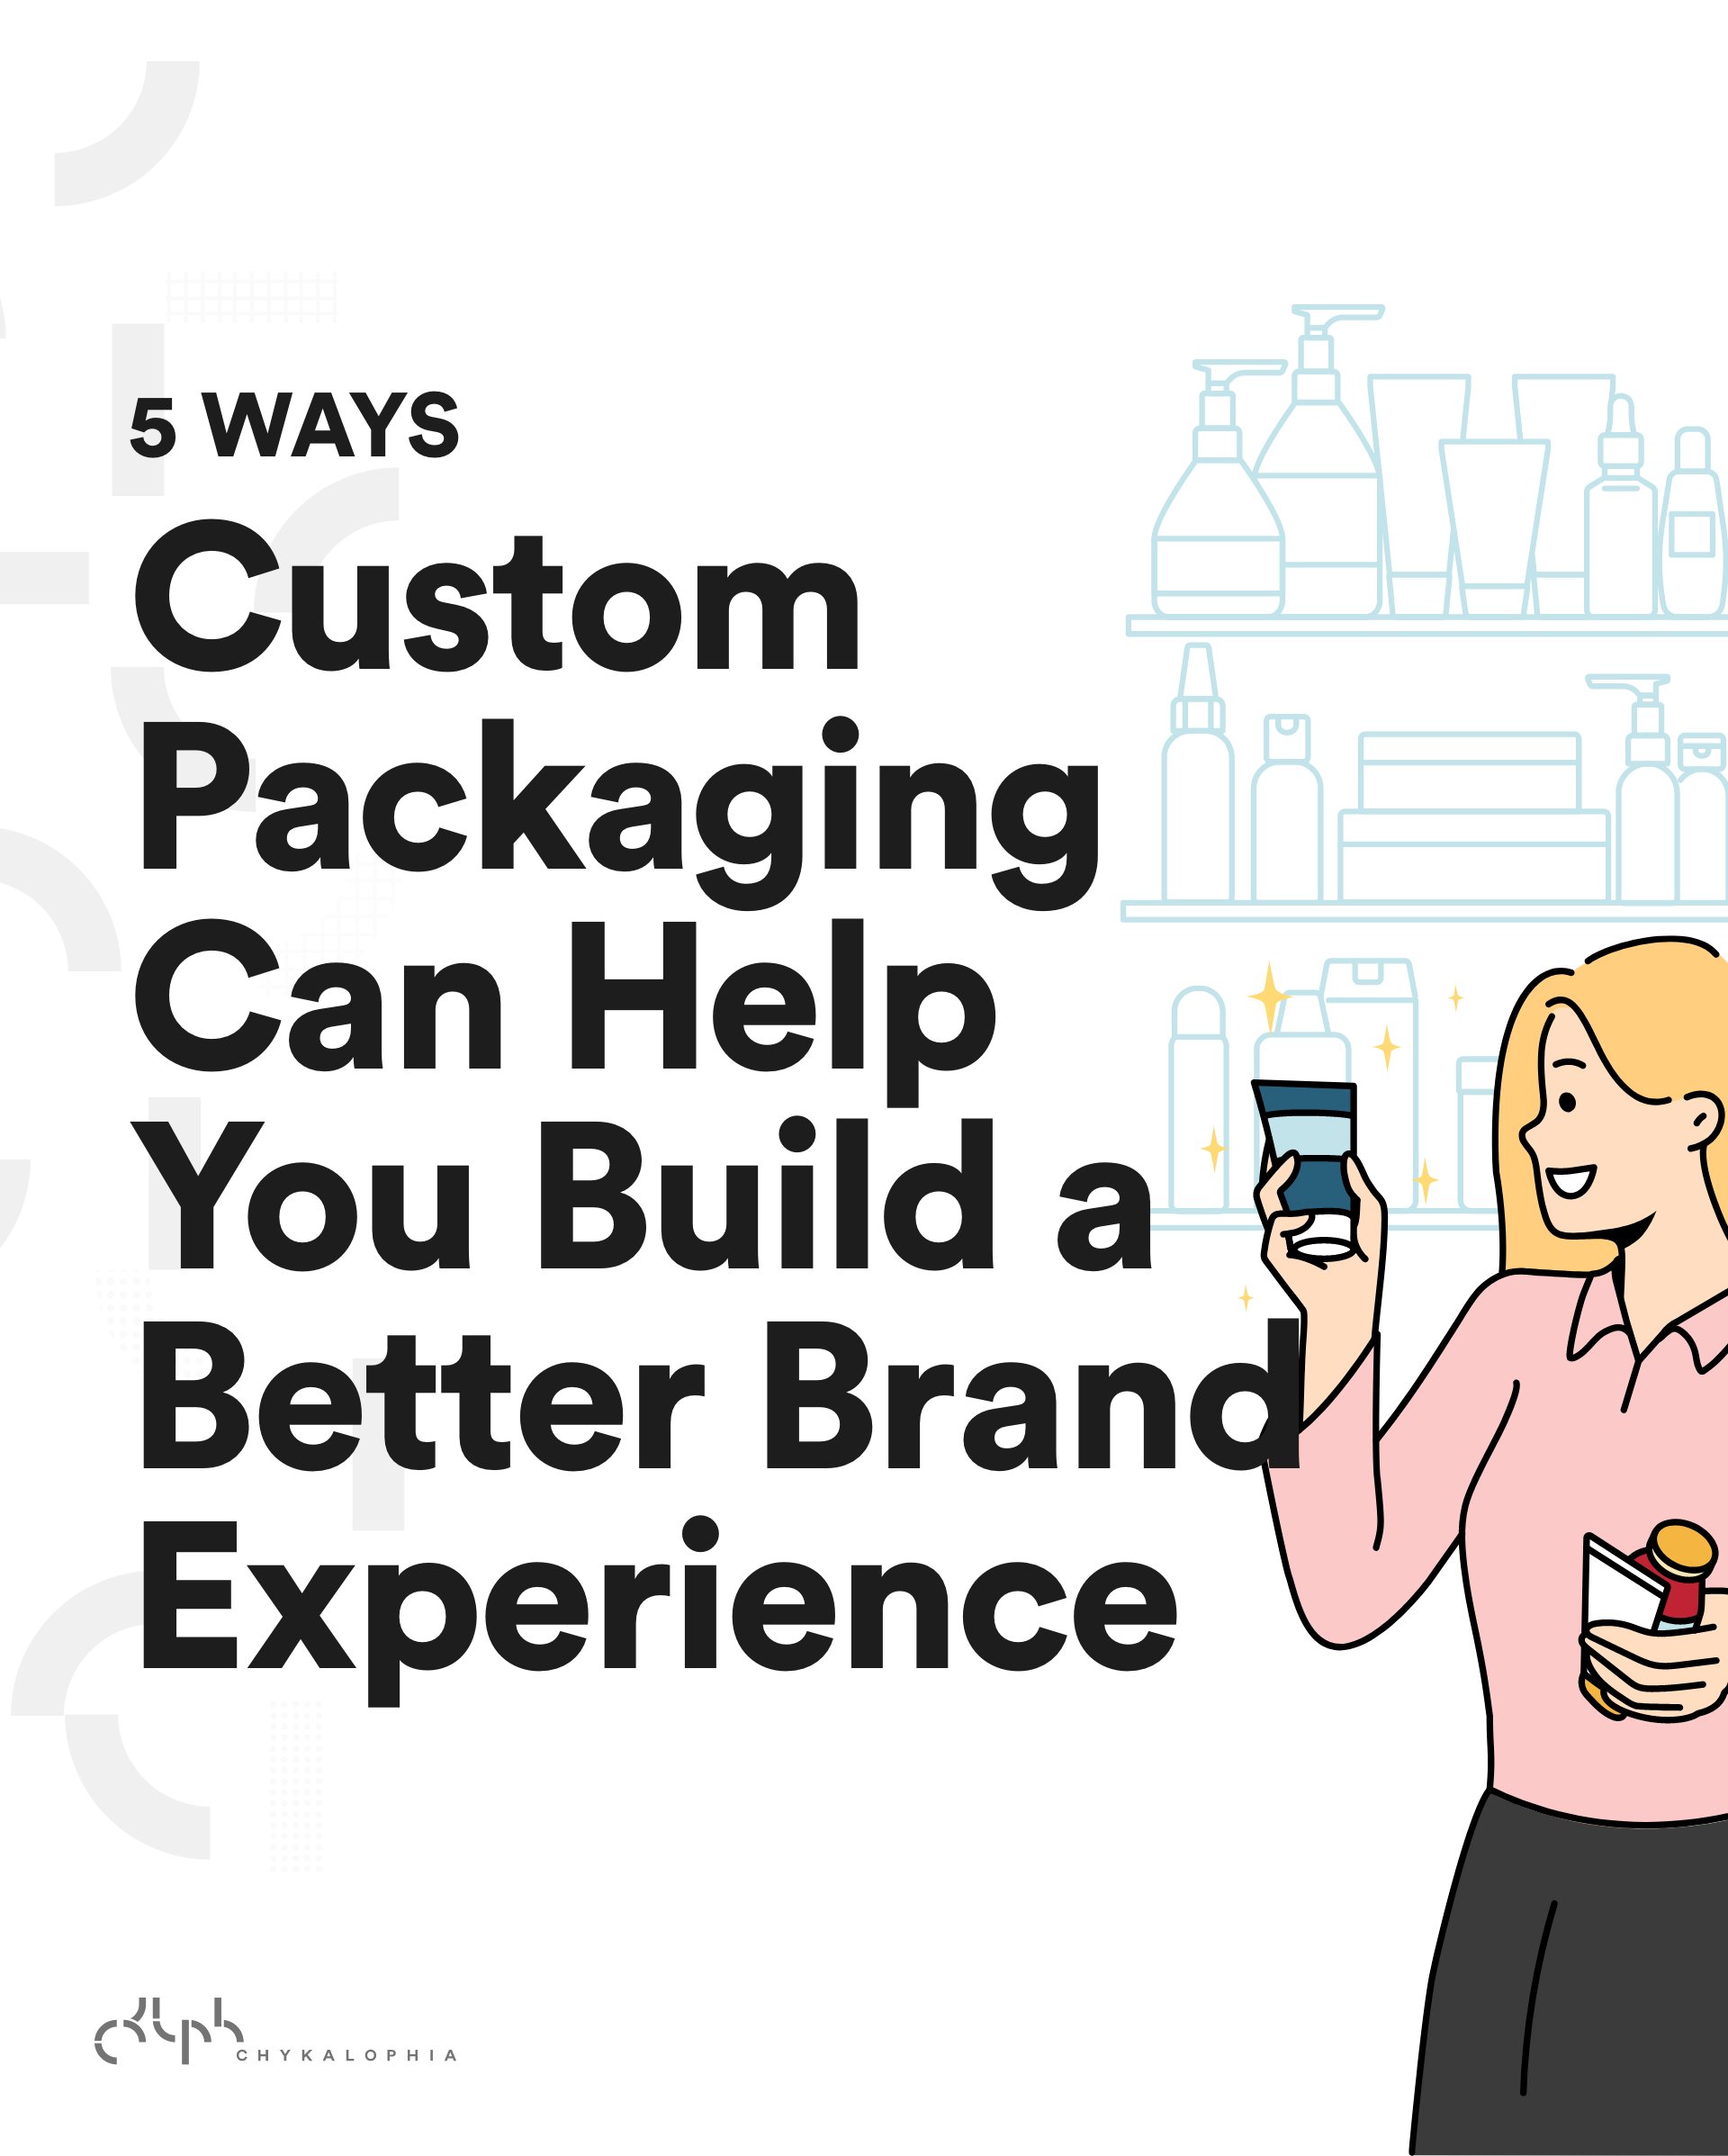 5 Ways Custom Packaging Can Help You Build a Better Brand Experience